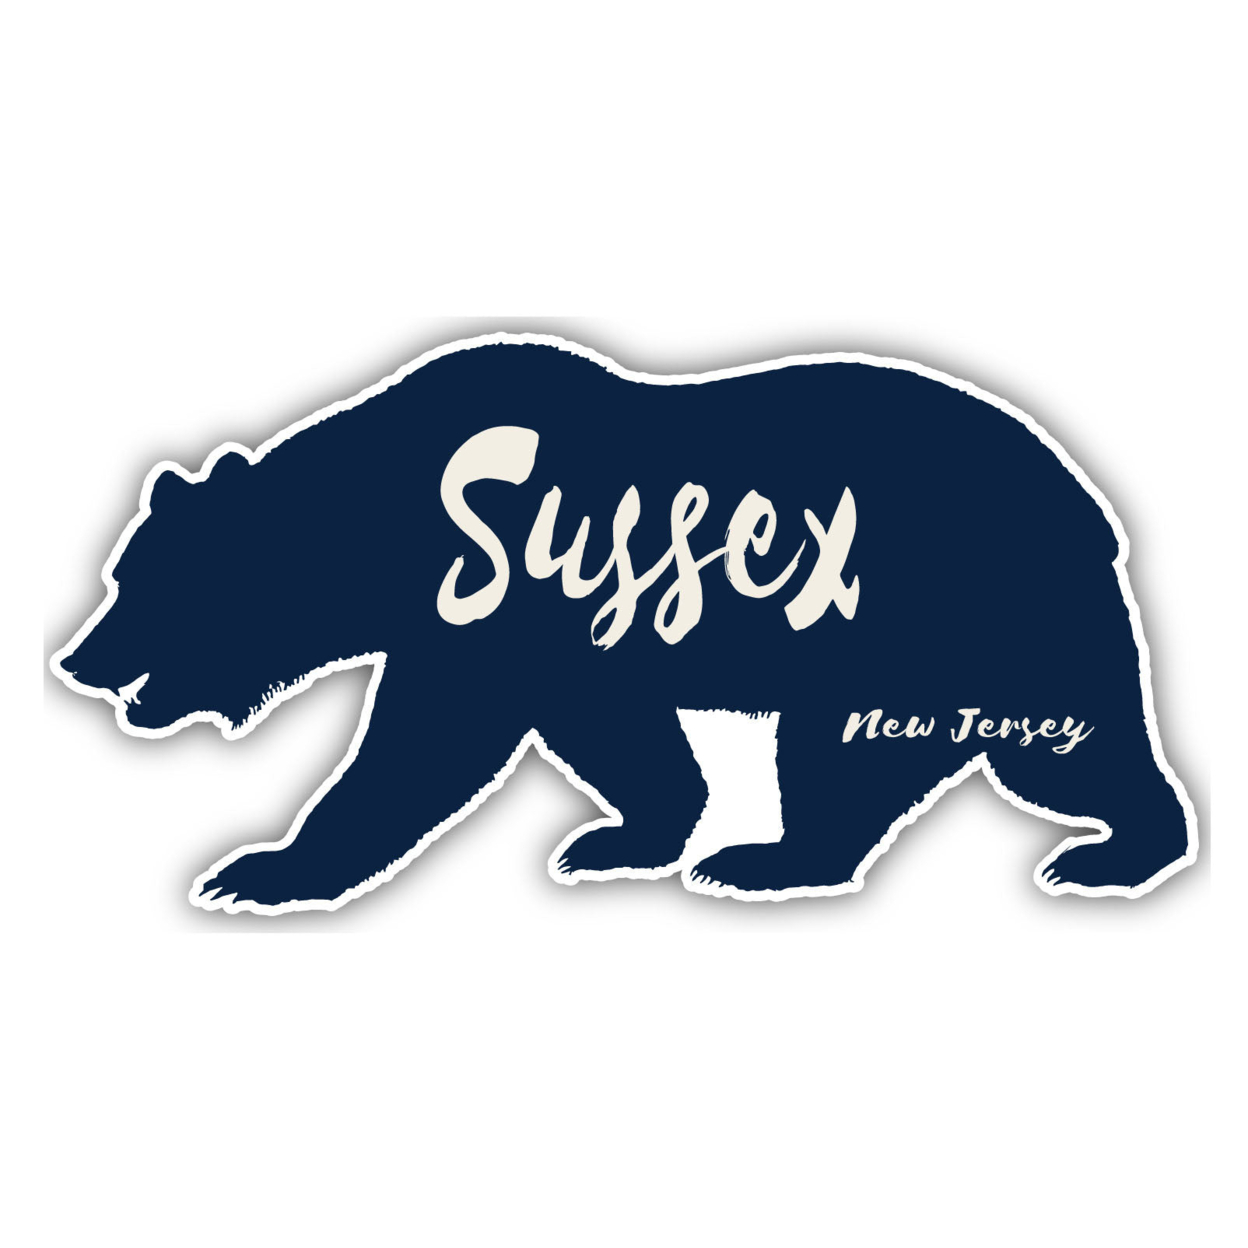 Sussex New Jersey Souvenir Decorative Stickers (Choose Theme And Size) - Single Unit, 4-Inch, Bear